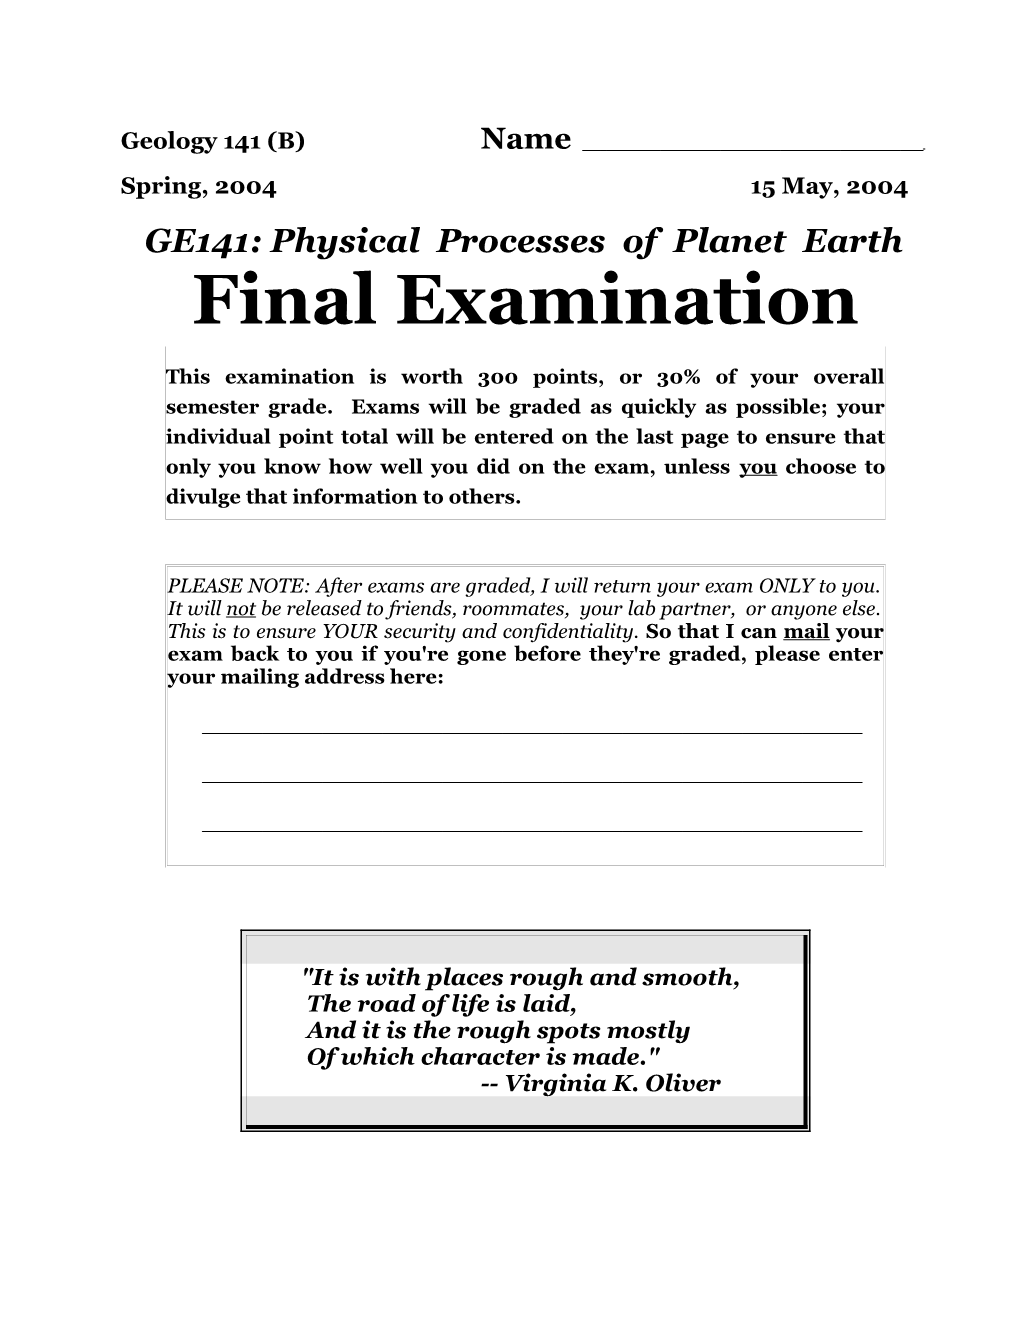 Geology 141: Spring, 2004 Lecture Final Examination Page 17